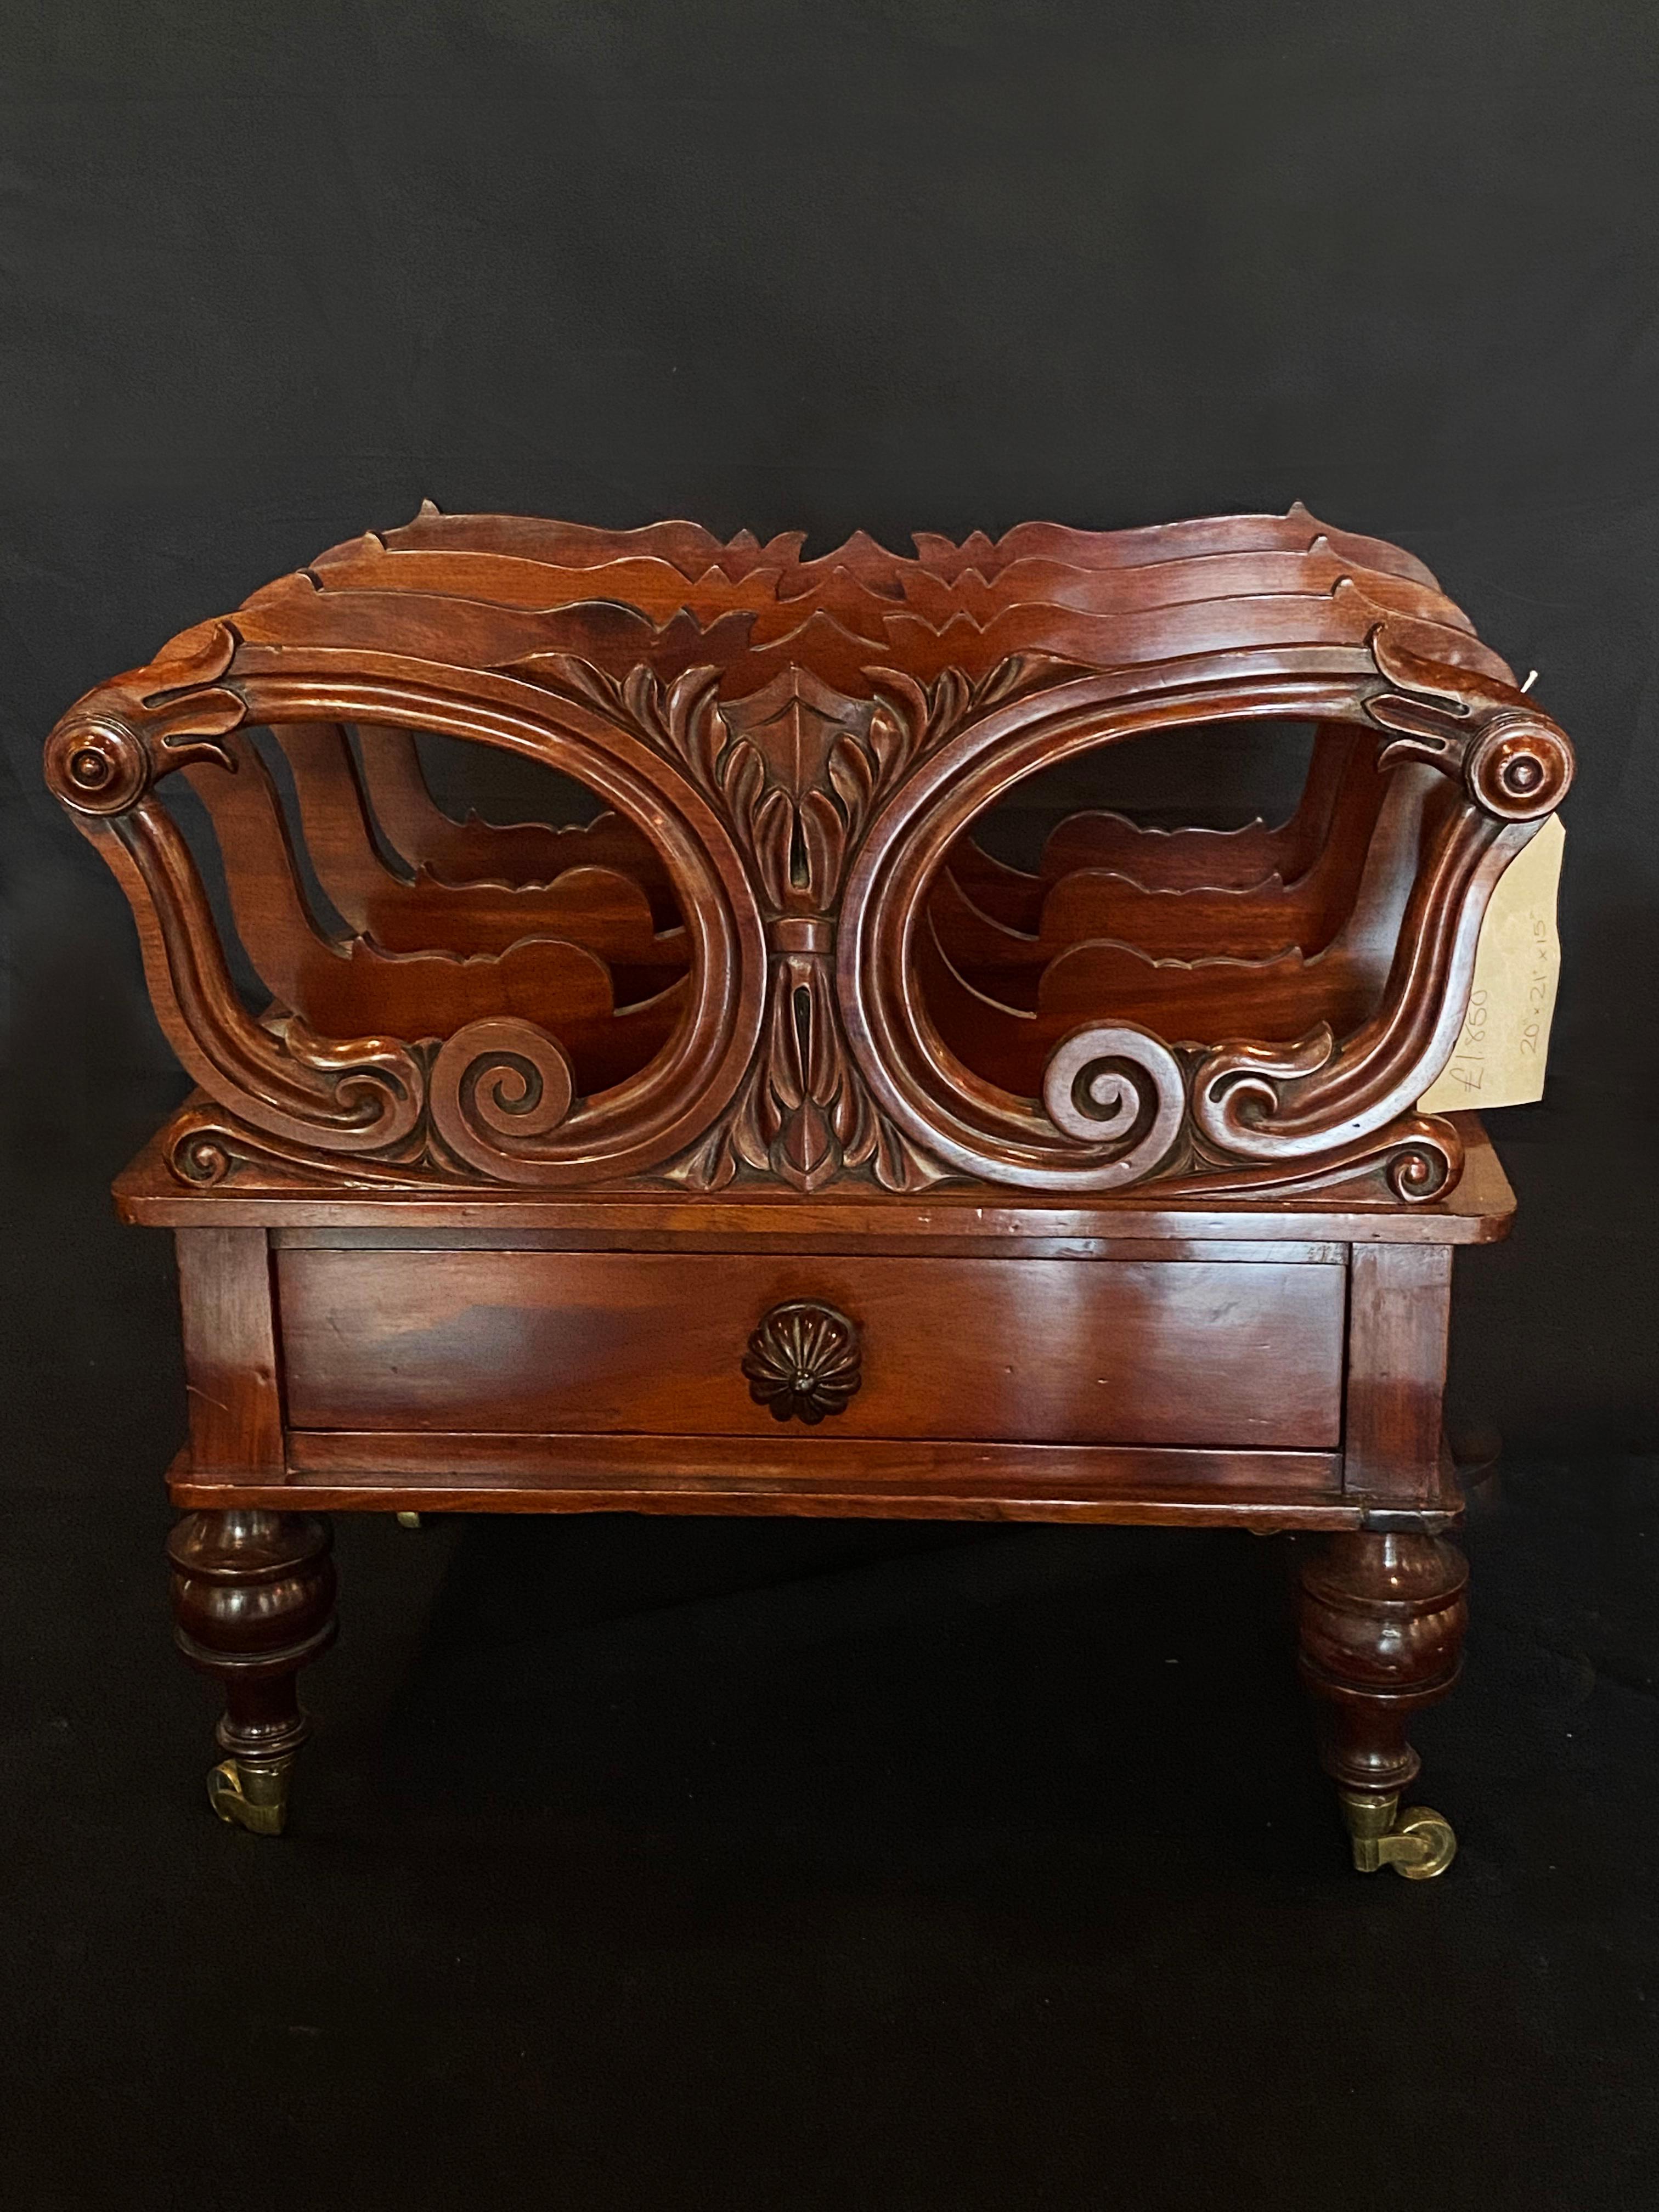 An incredibly handsome early Victorian mahogany canterbury. With four shaped pierced dividers, joined by turned balusters, above a cavetto-moulded plinth, enclosing a mahogany frieze drawer on bun legs and brass castors.